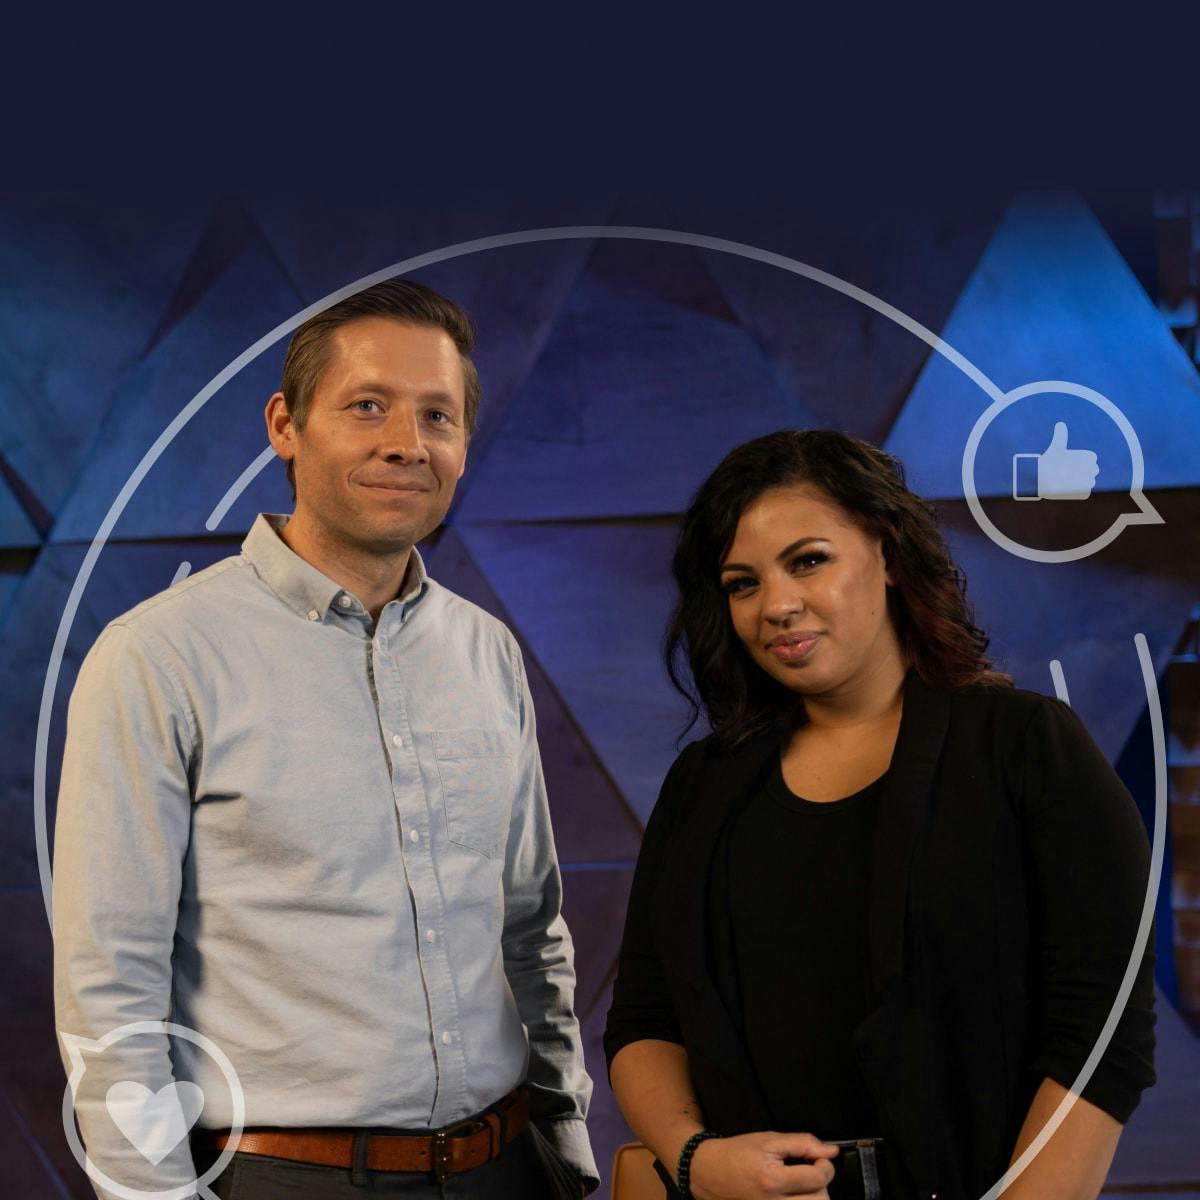 Tiffany Day and Sam Michie stand next to each other in front of a blue geometric background. Sam is wearing a light blue shirt and Tiffany is wearing a black t-shirt and a black blazer. They are both looking at the camera and smiling.